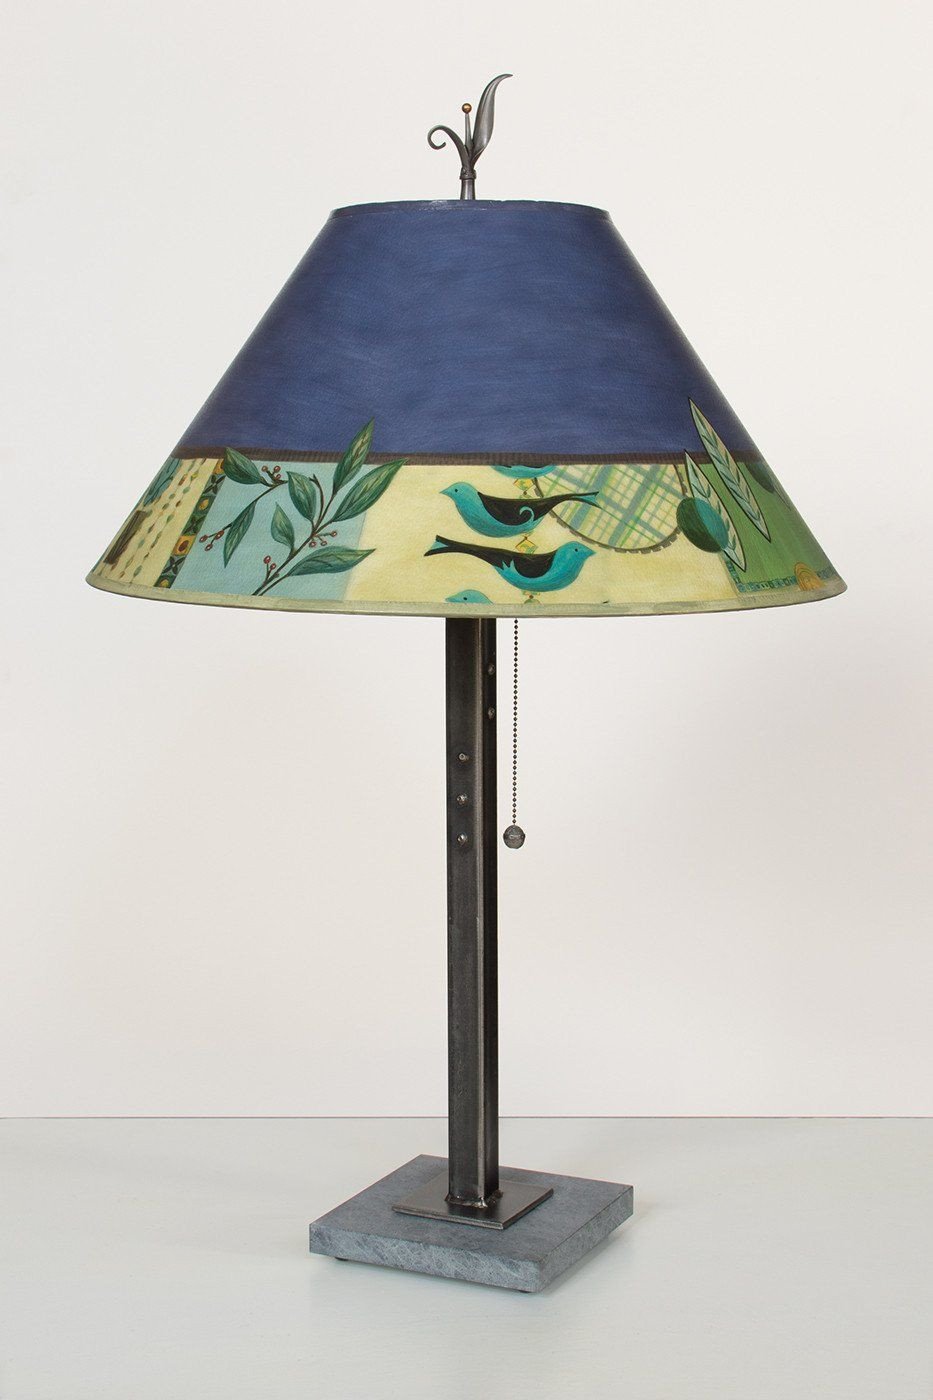 Steel Table Lamp on Italian Marble with Large Conical Shade in New Capri Periwinkle